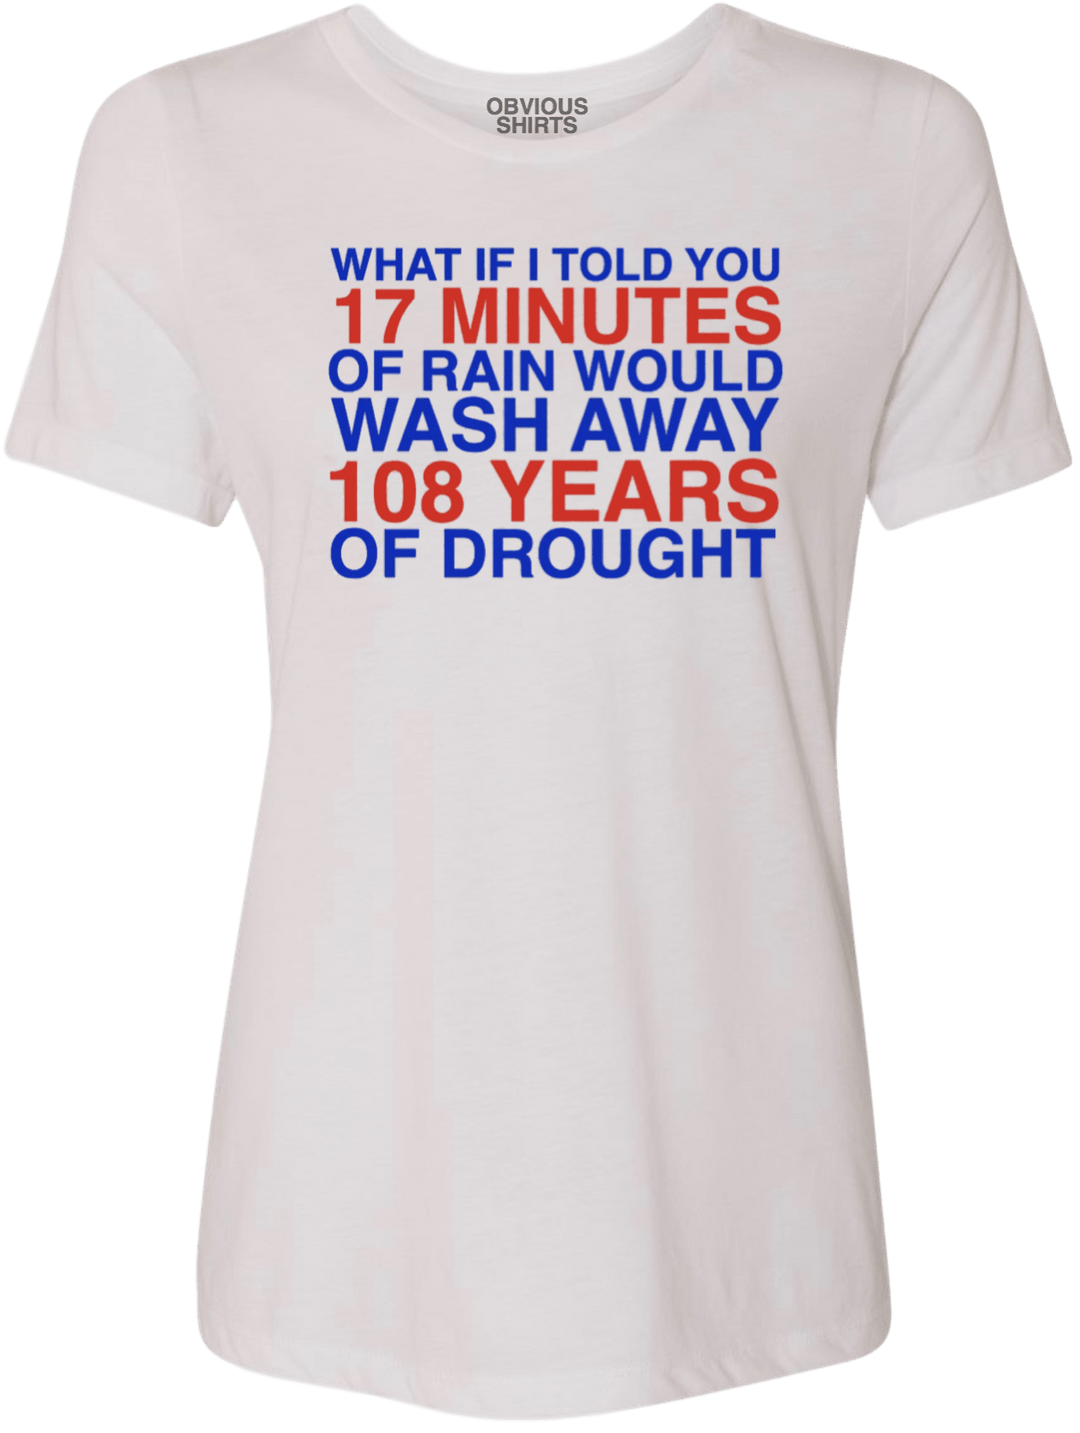 WHAT IF I TOLD YOU...(WOMEN'S CREW) - OBVIOUS SHIRTS.